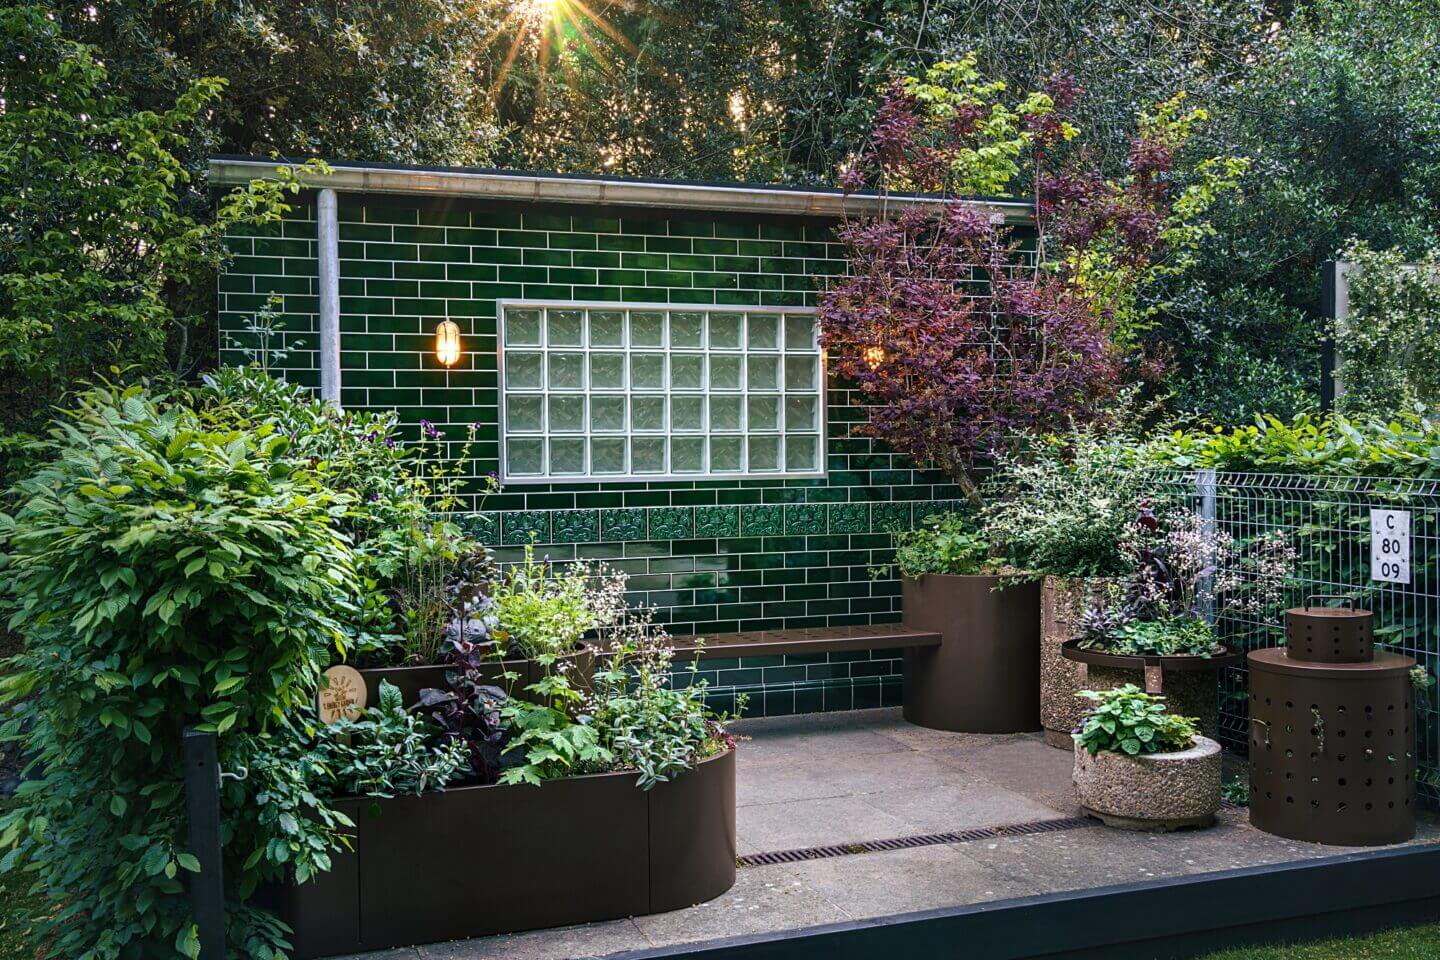 Bausager and Bouquet 2023 Chelsea container garden, 'The Platform Garden' with planting in pots and green tiles